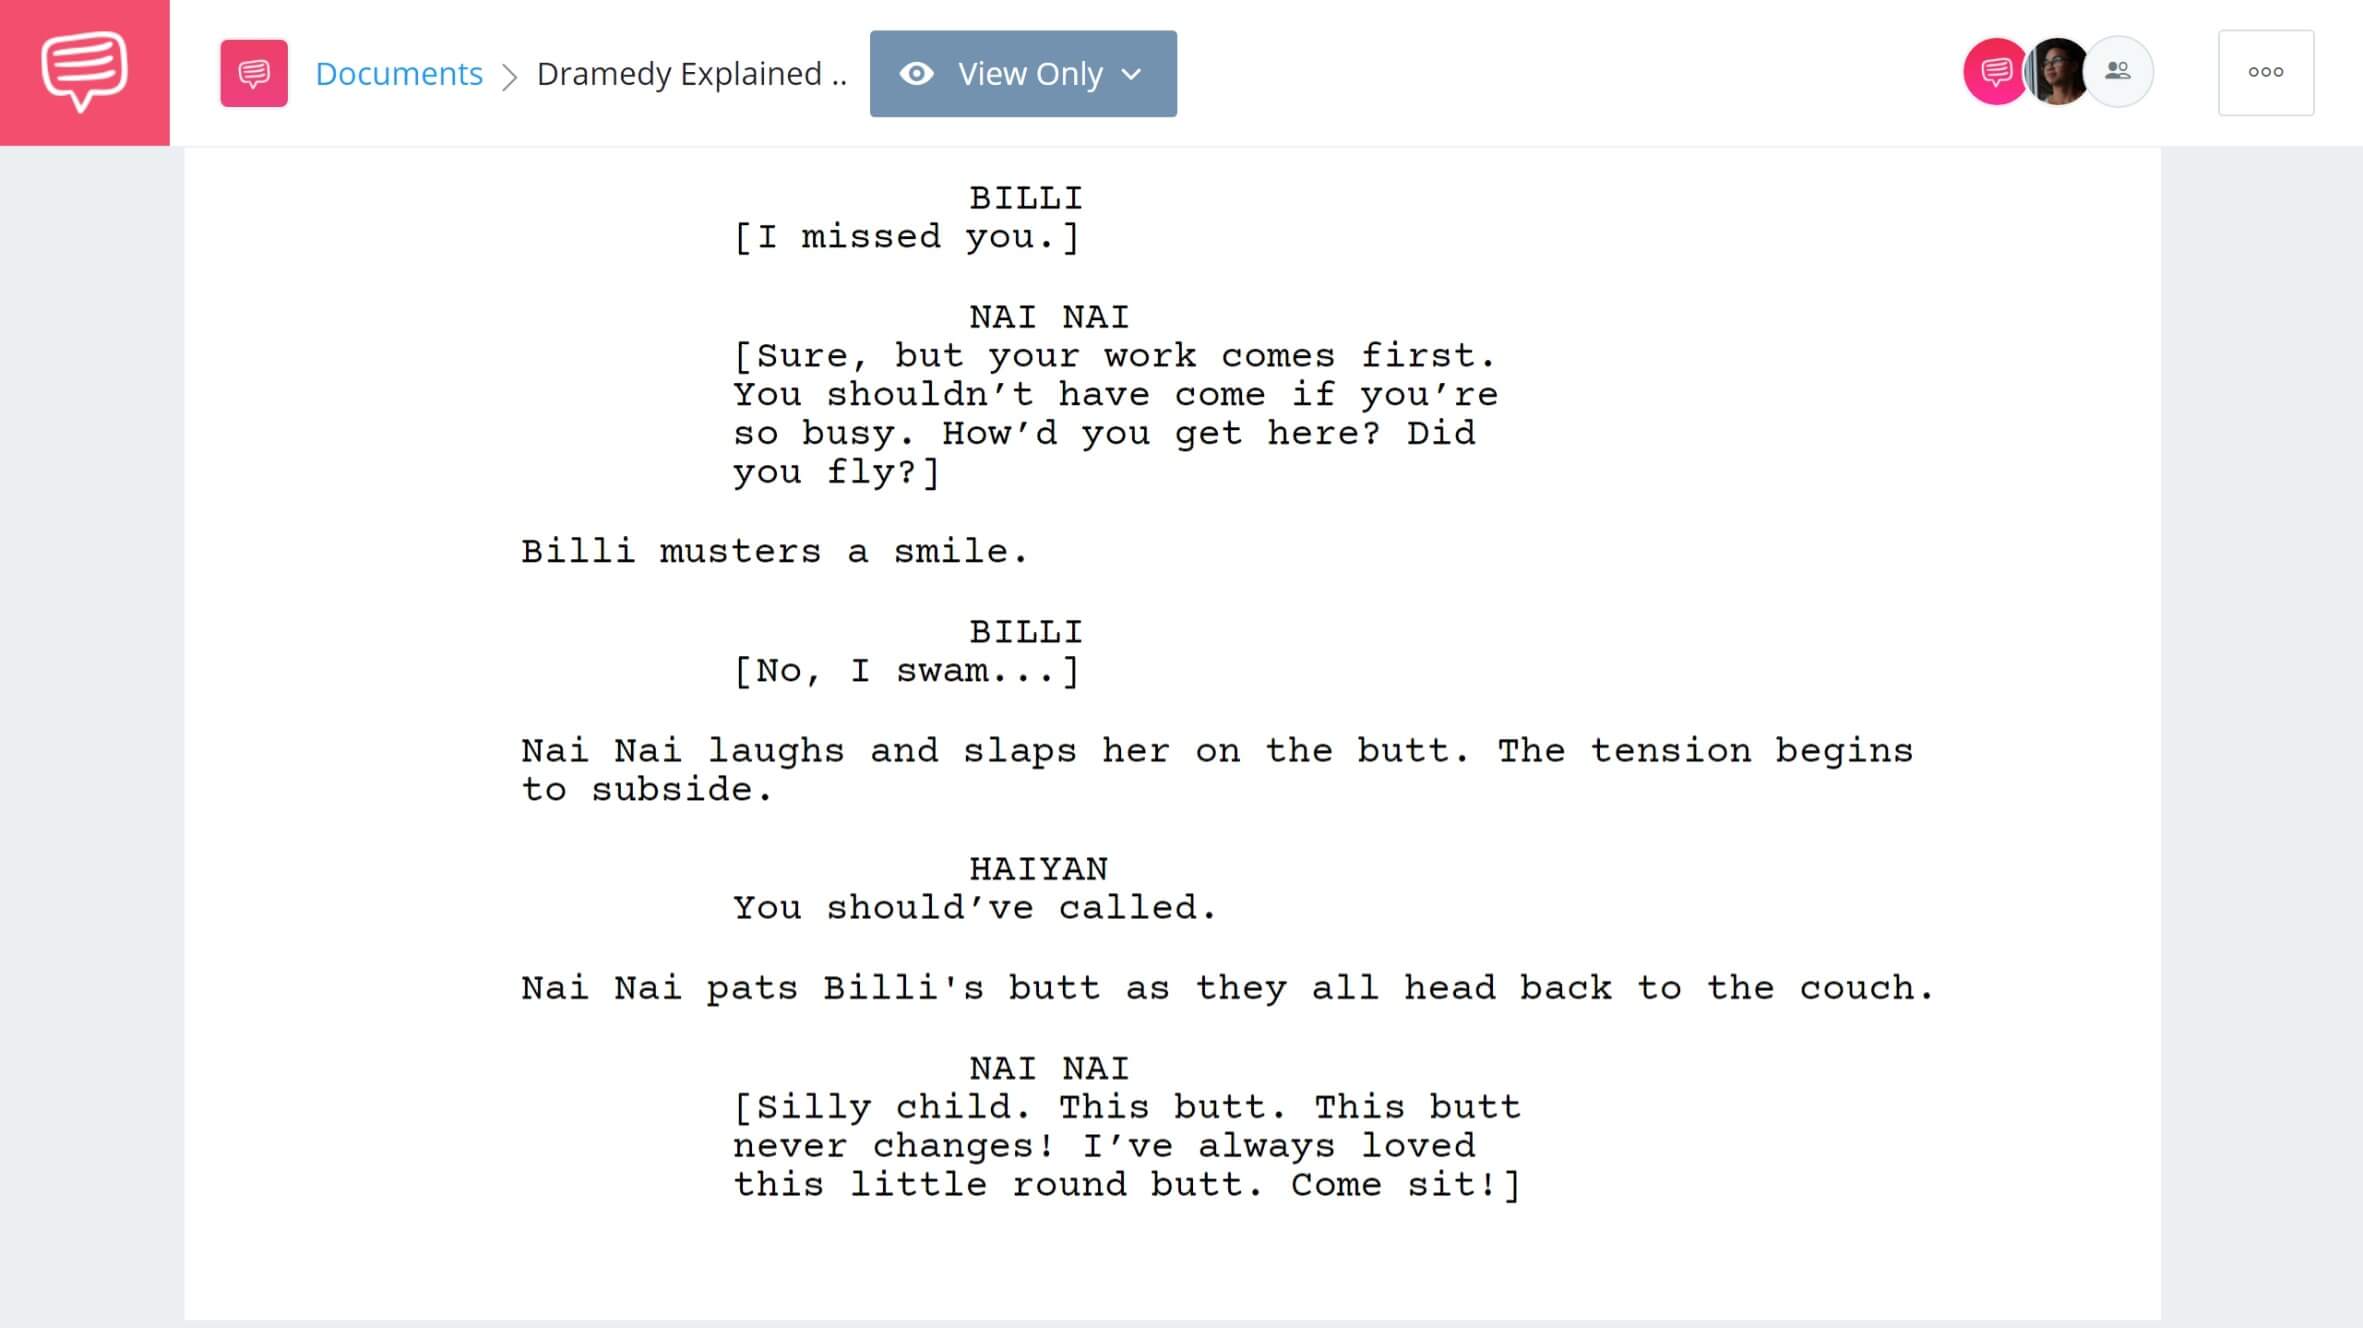 Dramedy Explained The Farewell Example StudioBinder Screenwriting Software